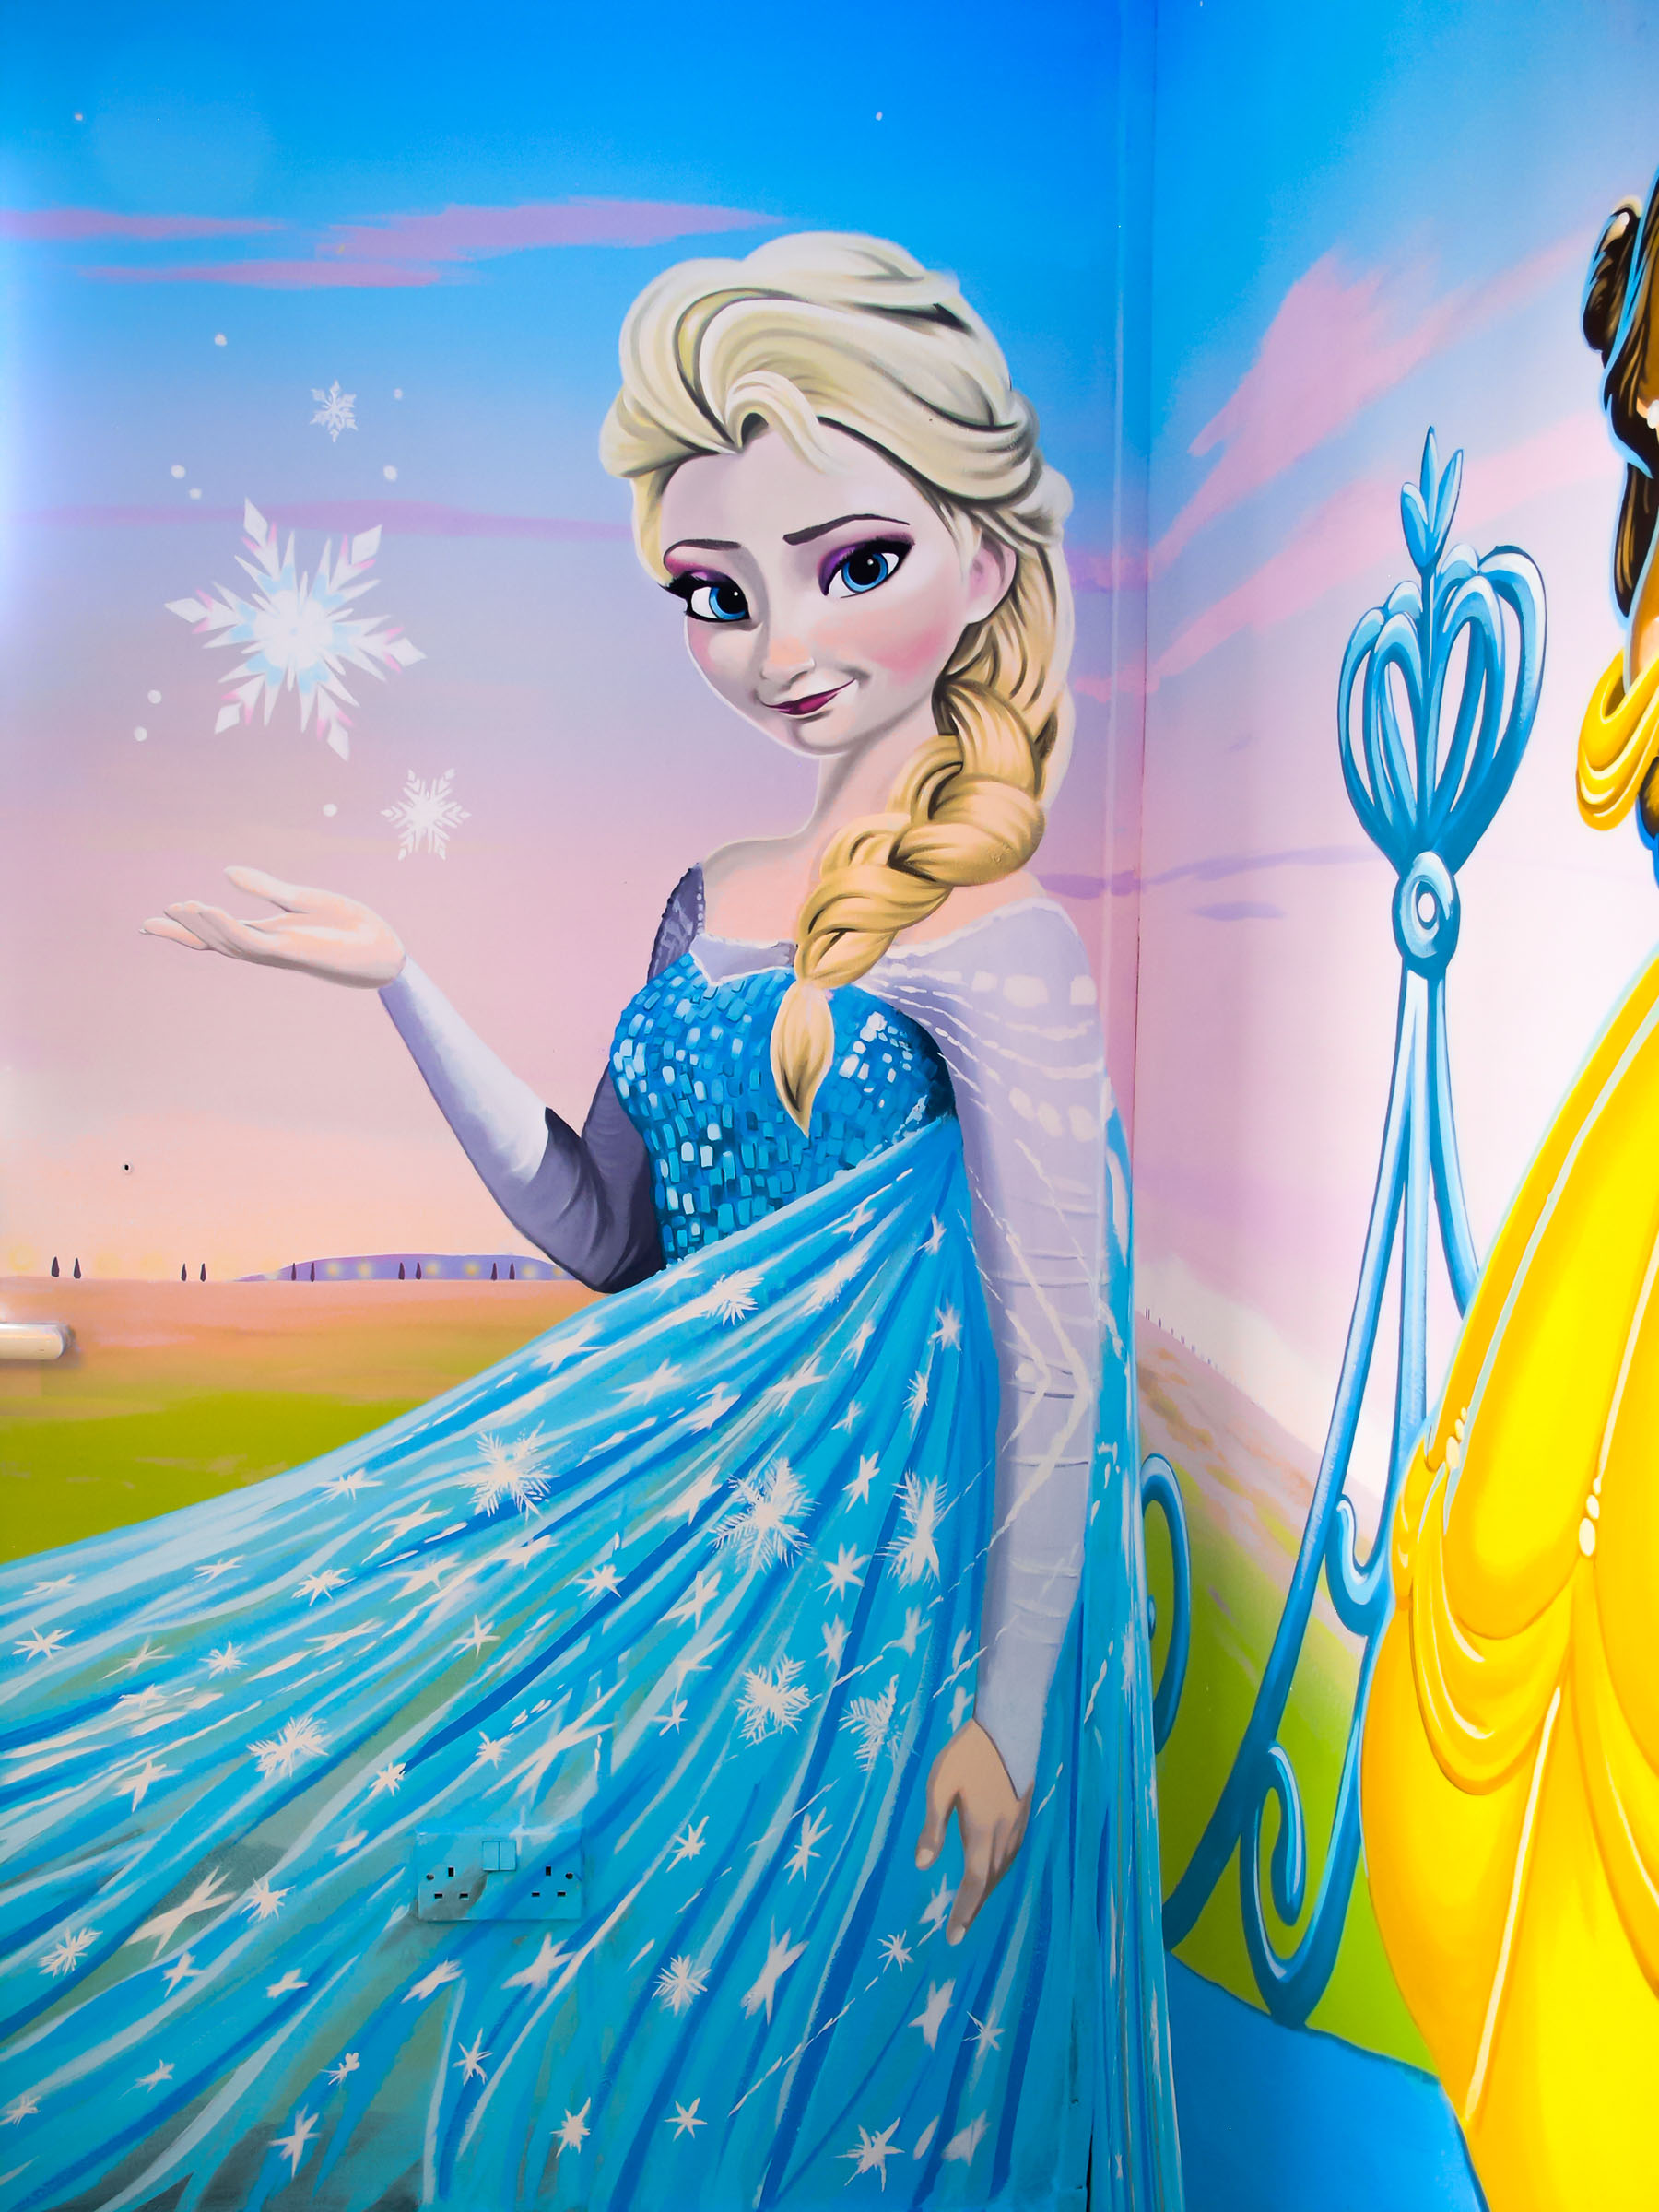 Elsa from Frozen rounds off this mural, with her detailed paintwork and translucent shawl